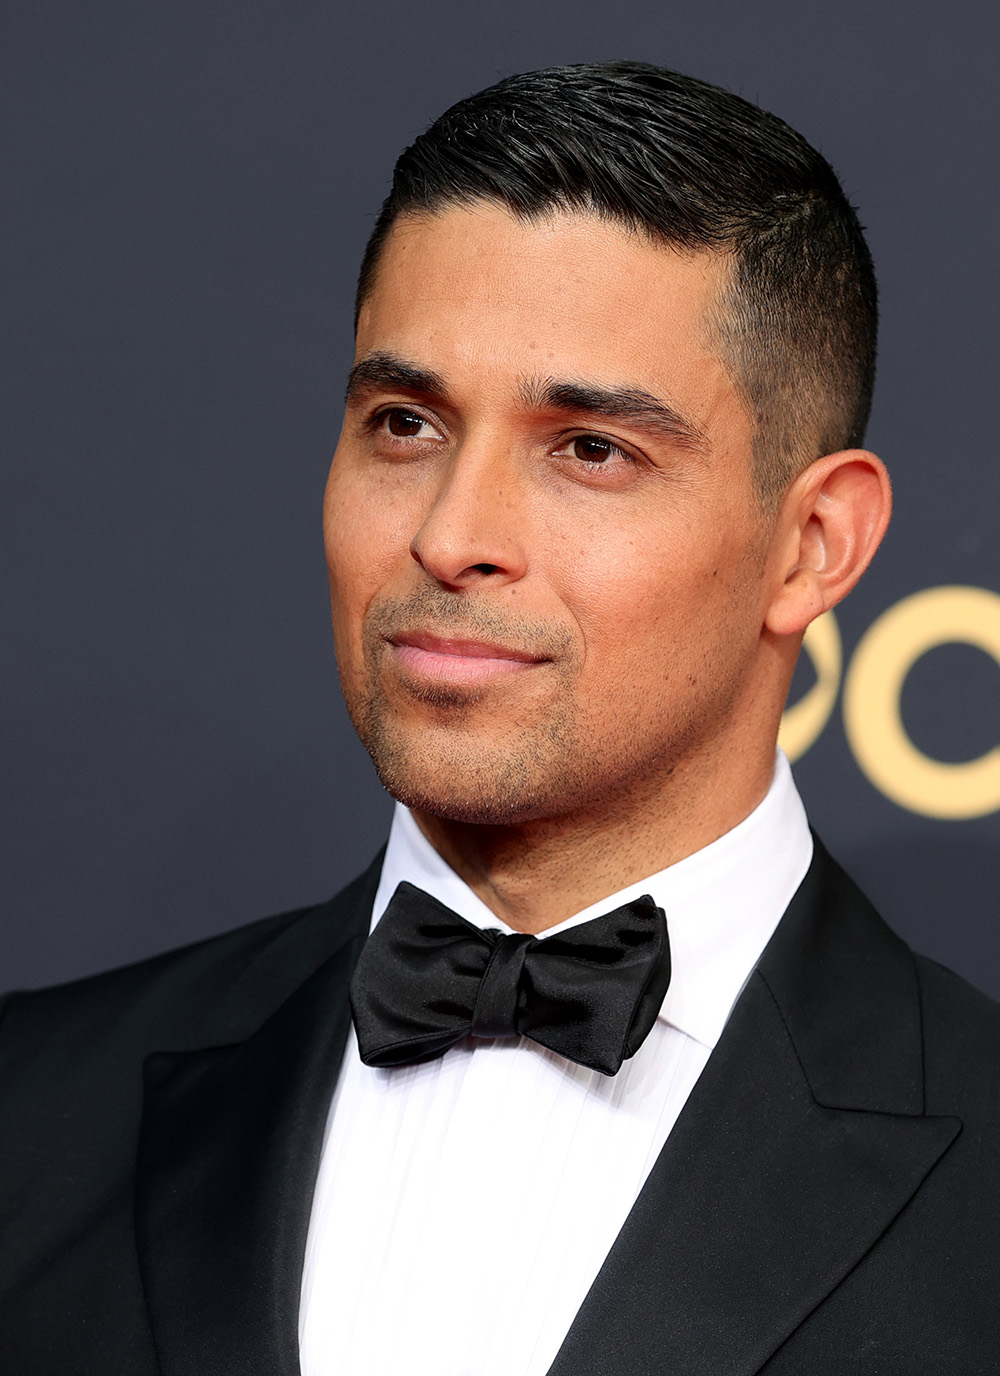 DISNEY BRANDED TELEVISION IS IN DEVELOPMENT WITH  WILMER VALDERRAMA TO EXECUTIVE PRODUCE AND STAR IN  A REIMAGINED 'ZORRO' SERIES